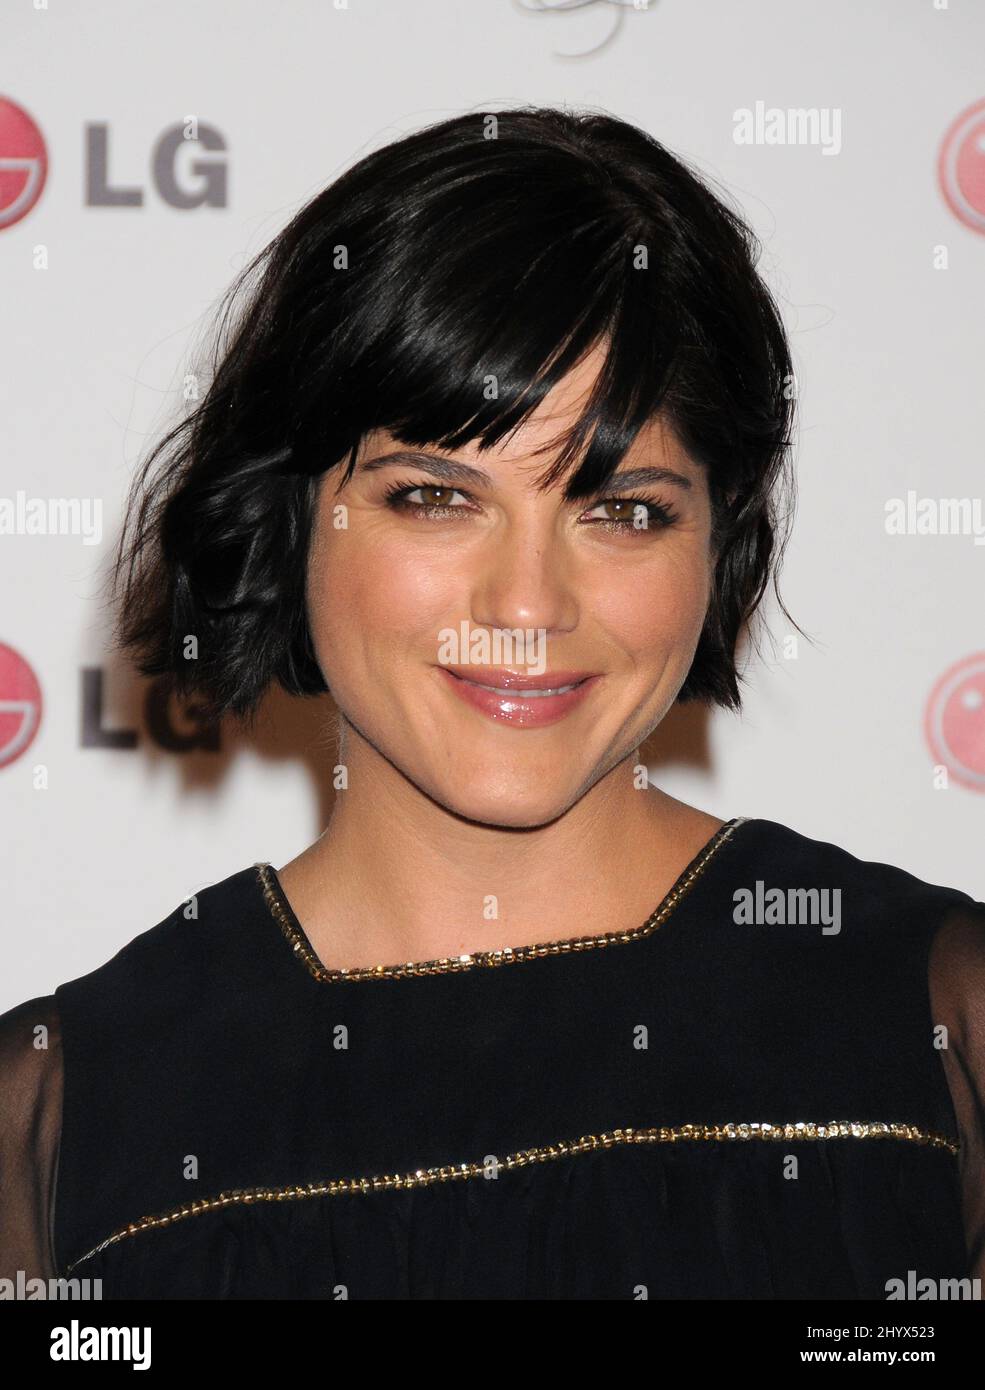 Selma Blair during a Night of Fashion and Technology with LG Mobile Phones at Soho House West Hollywood, California Stock Photo